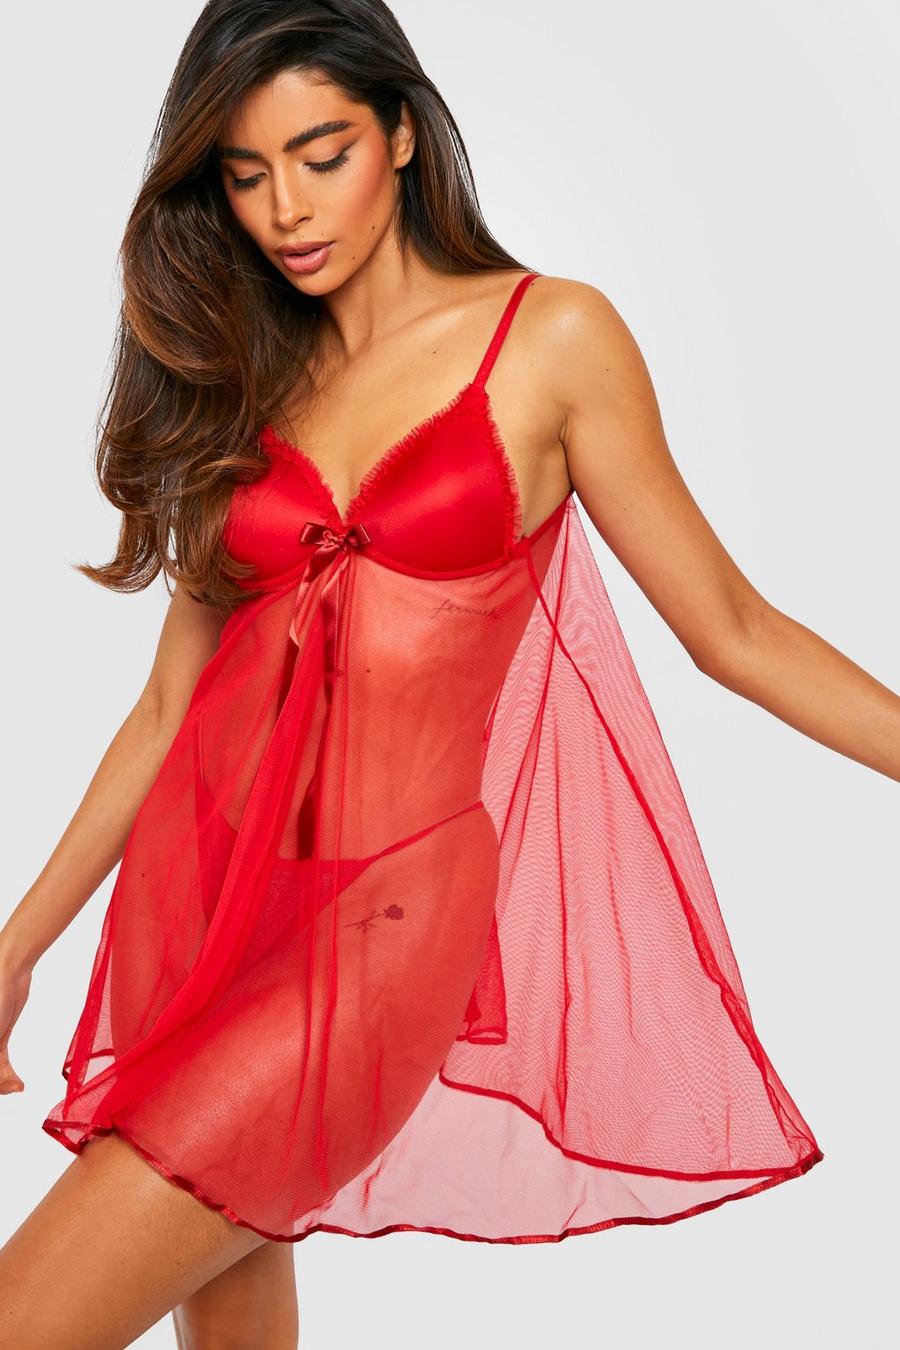 Super Push-up Nightgown - Red - Ladies